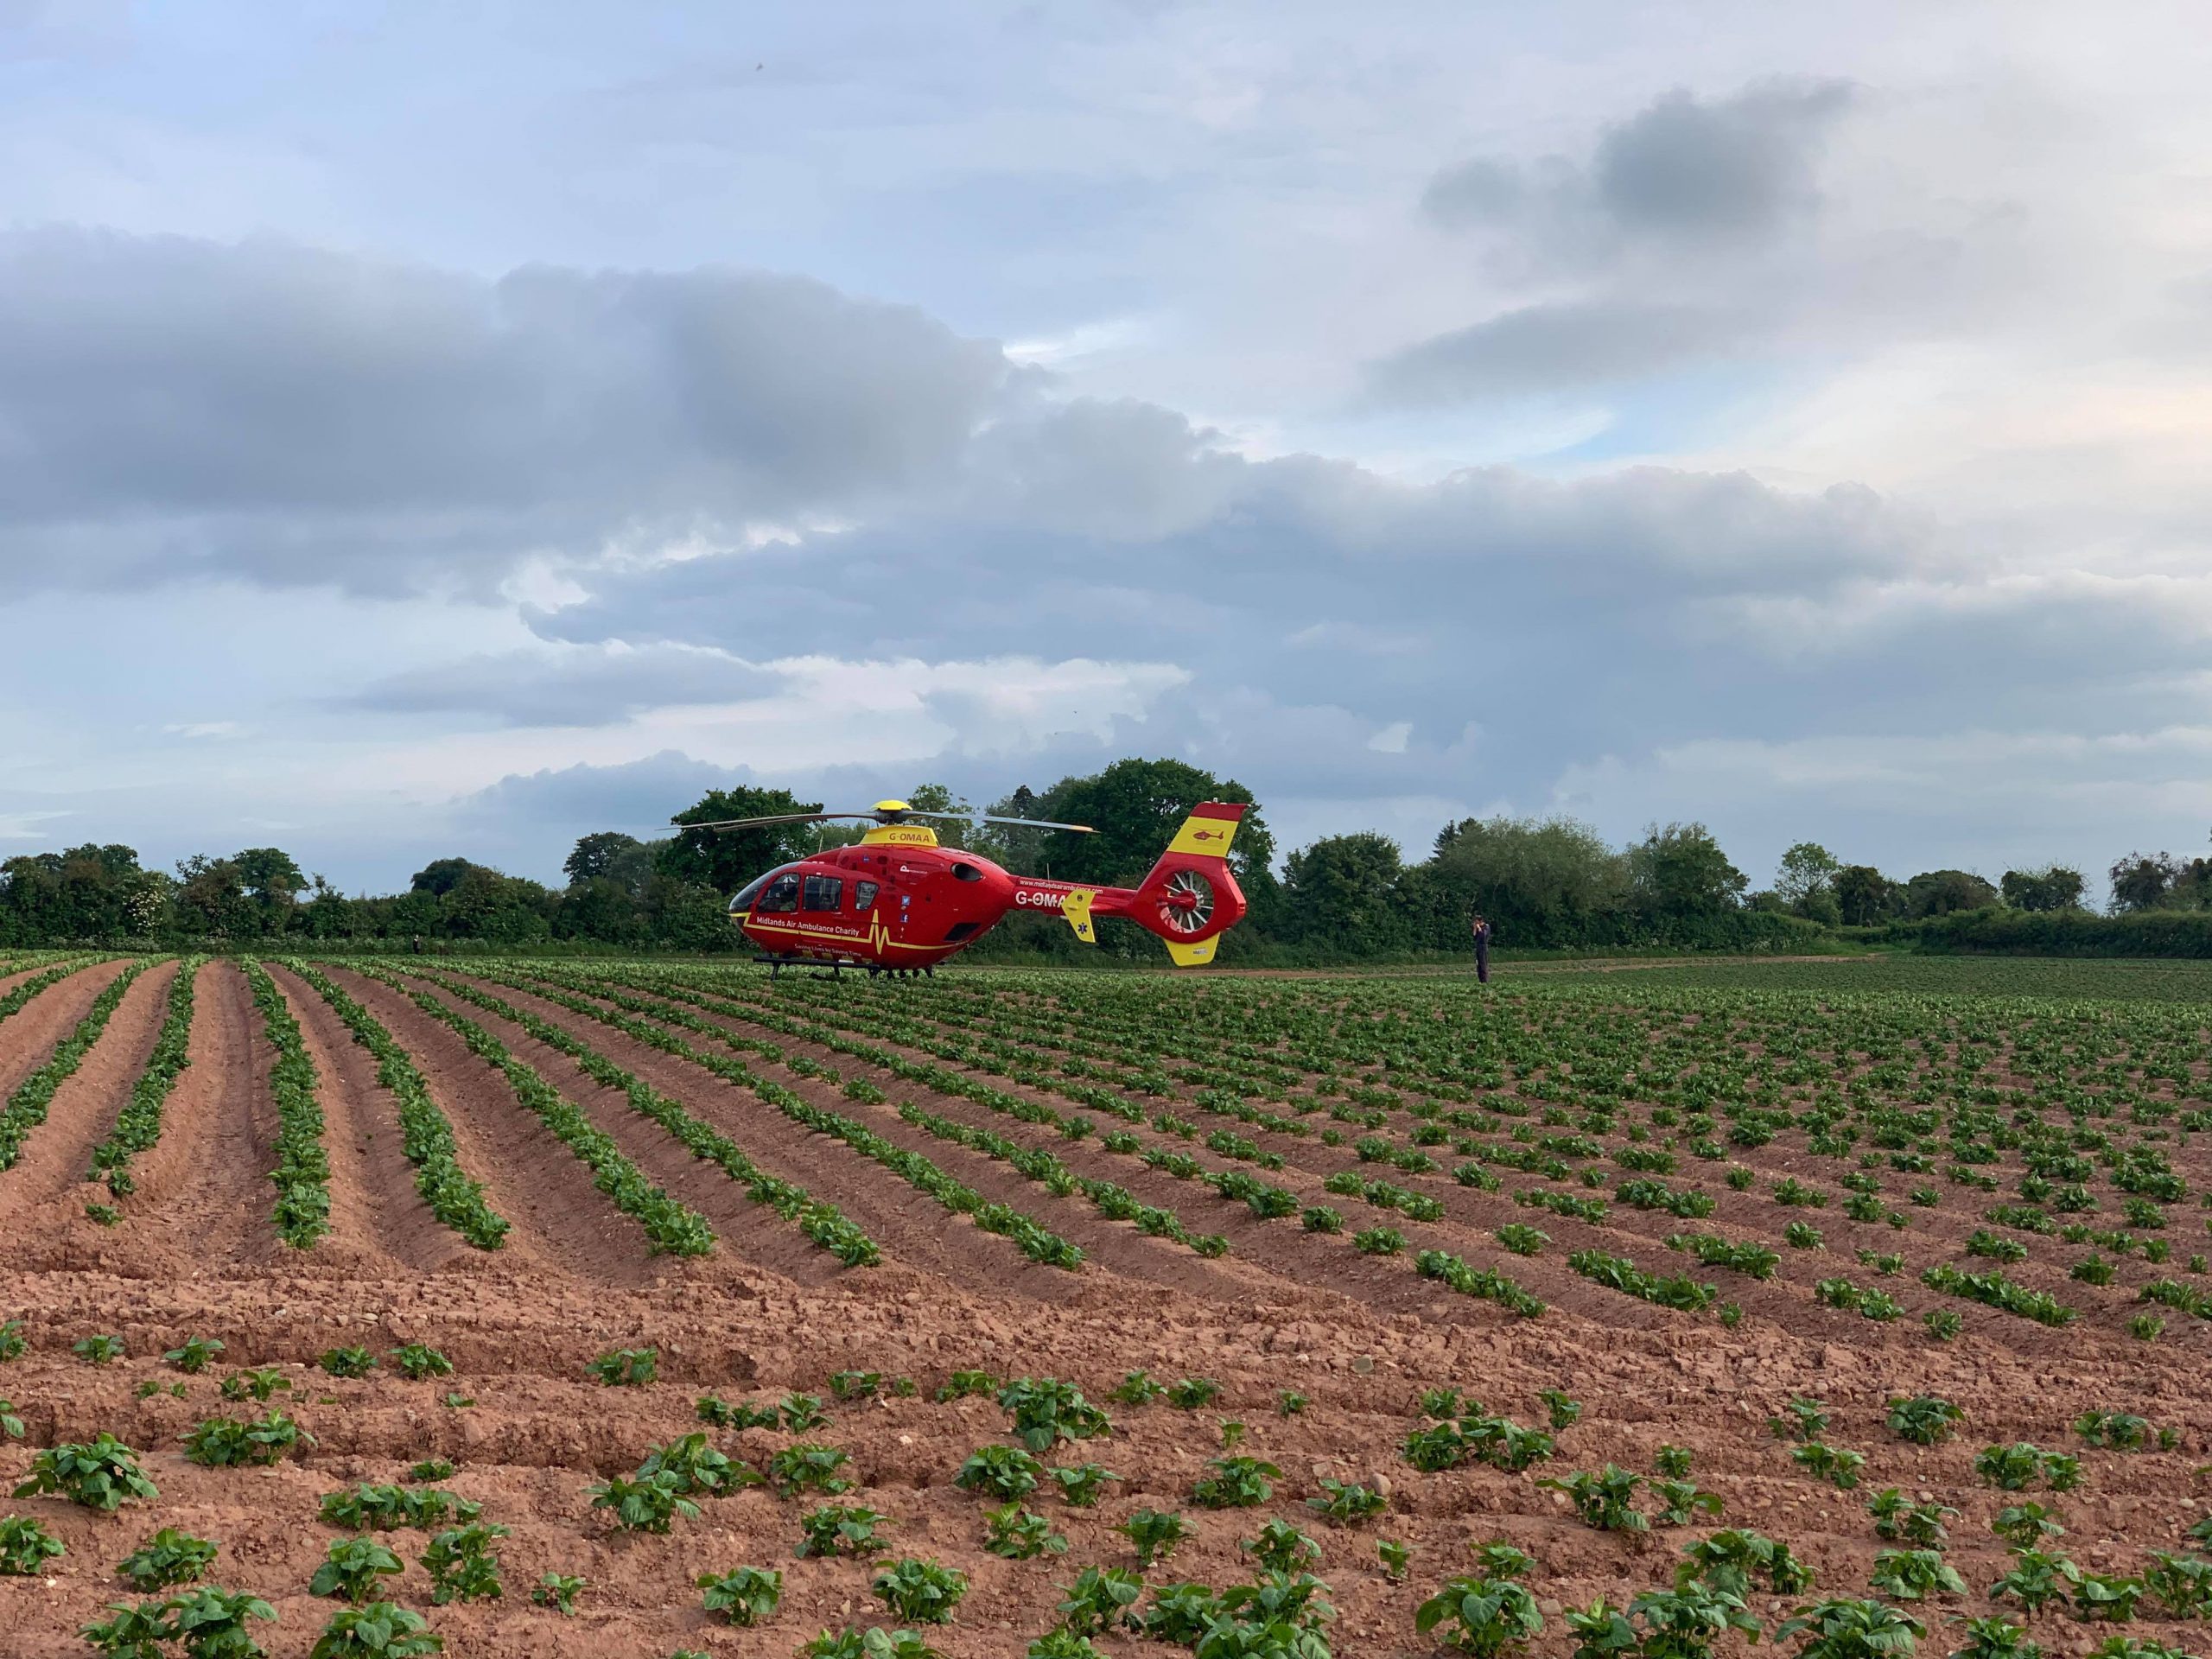 NEWS | Air ambulance attends incident in Hereford